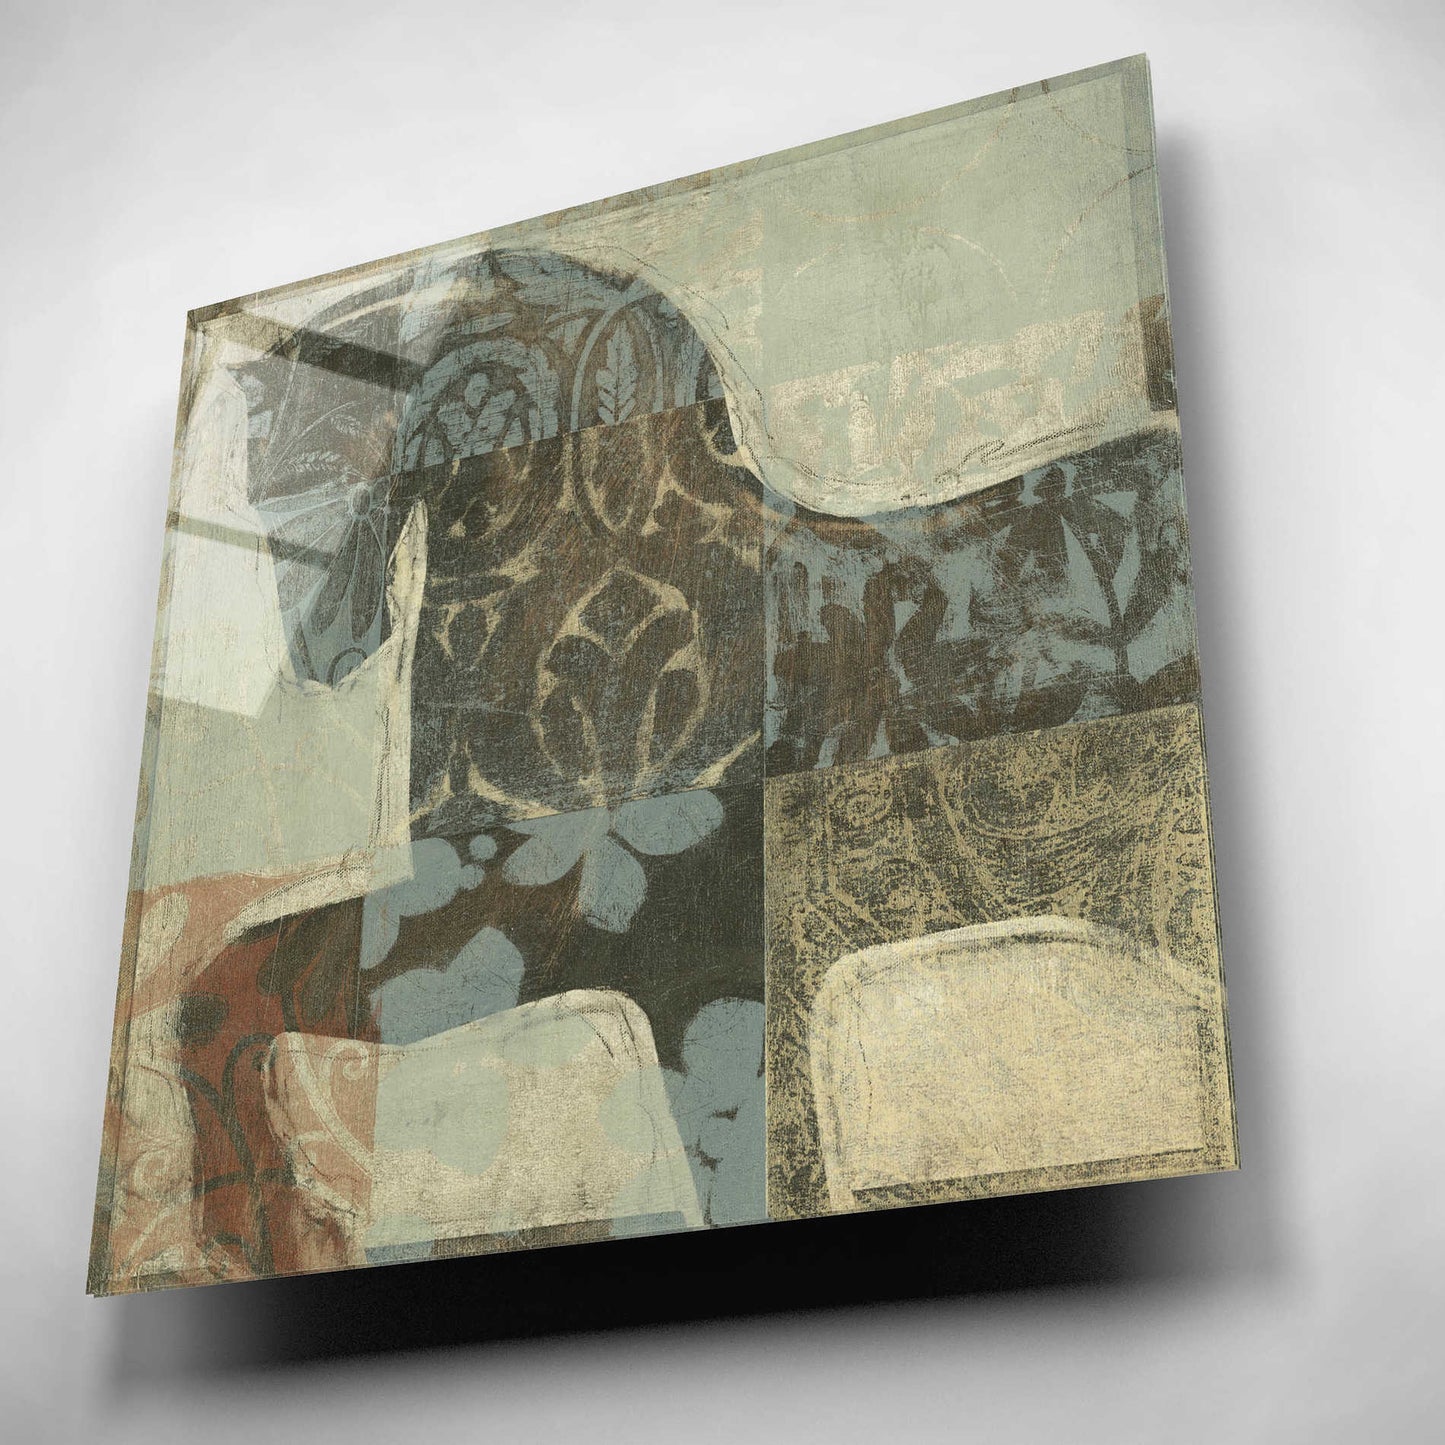 Epic Art 'Patterned Horse I' by Tim O'Toole, Acrylic Glass Wall Art,12x12